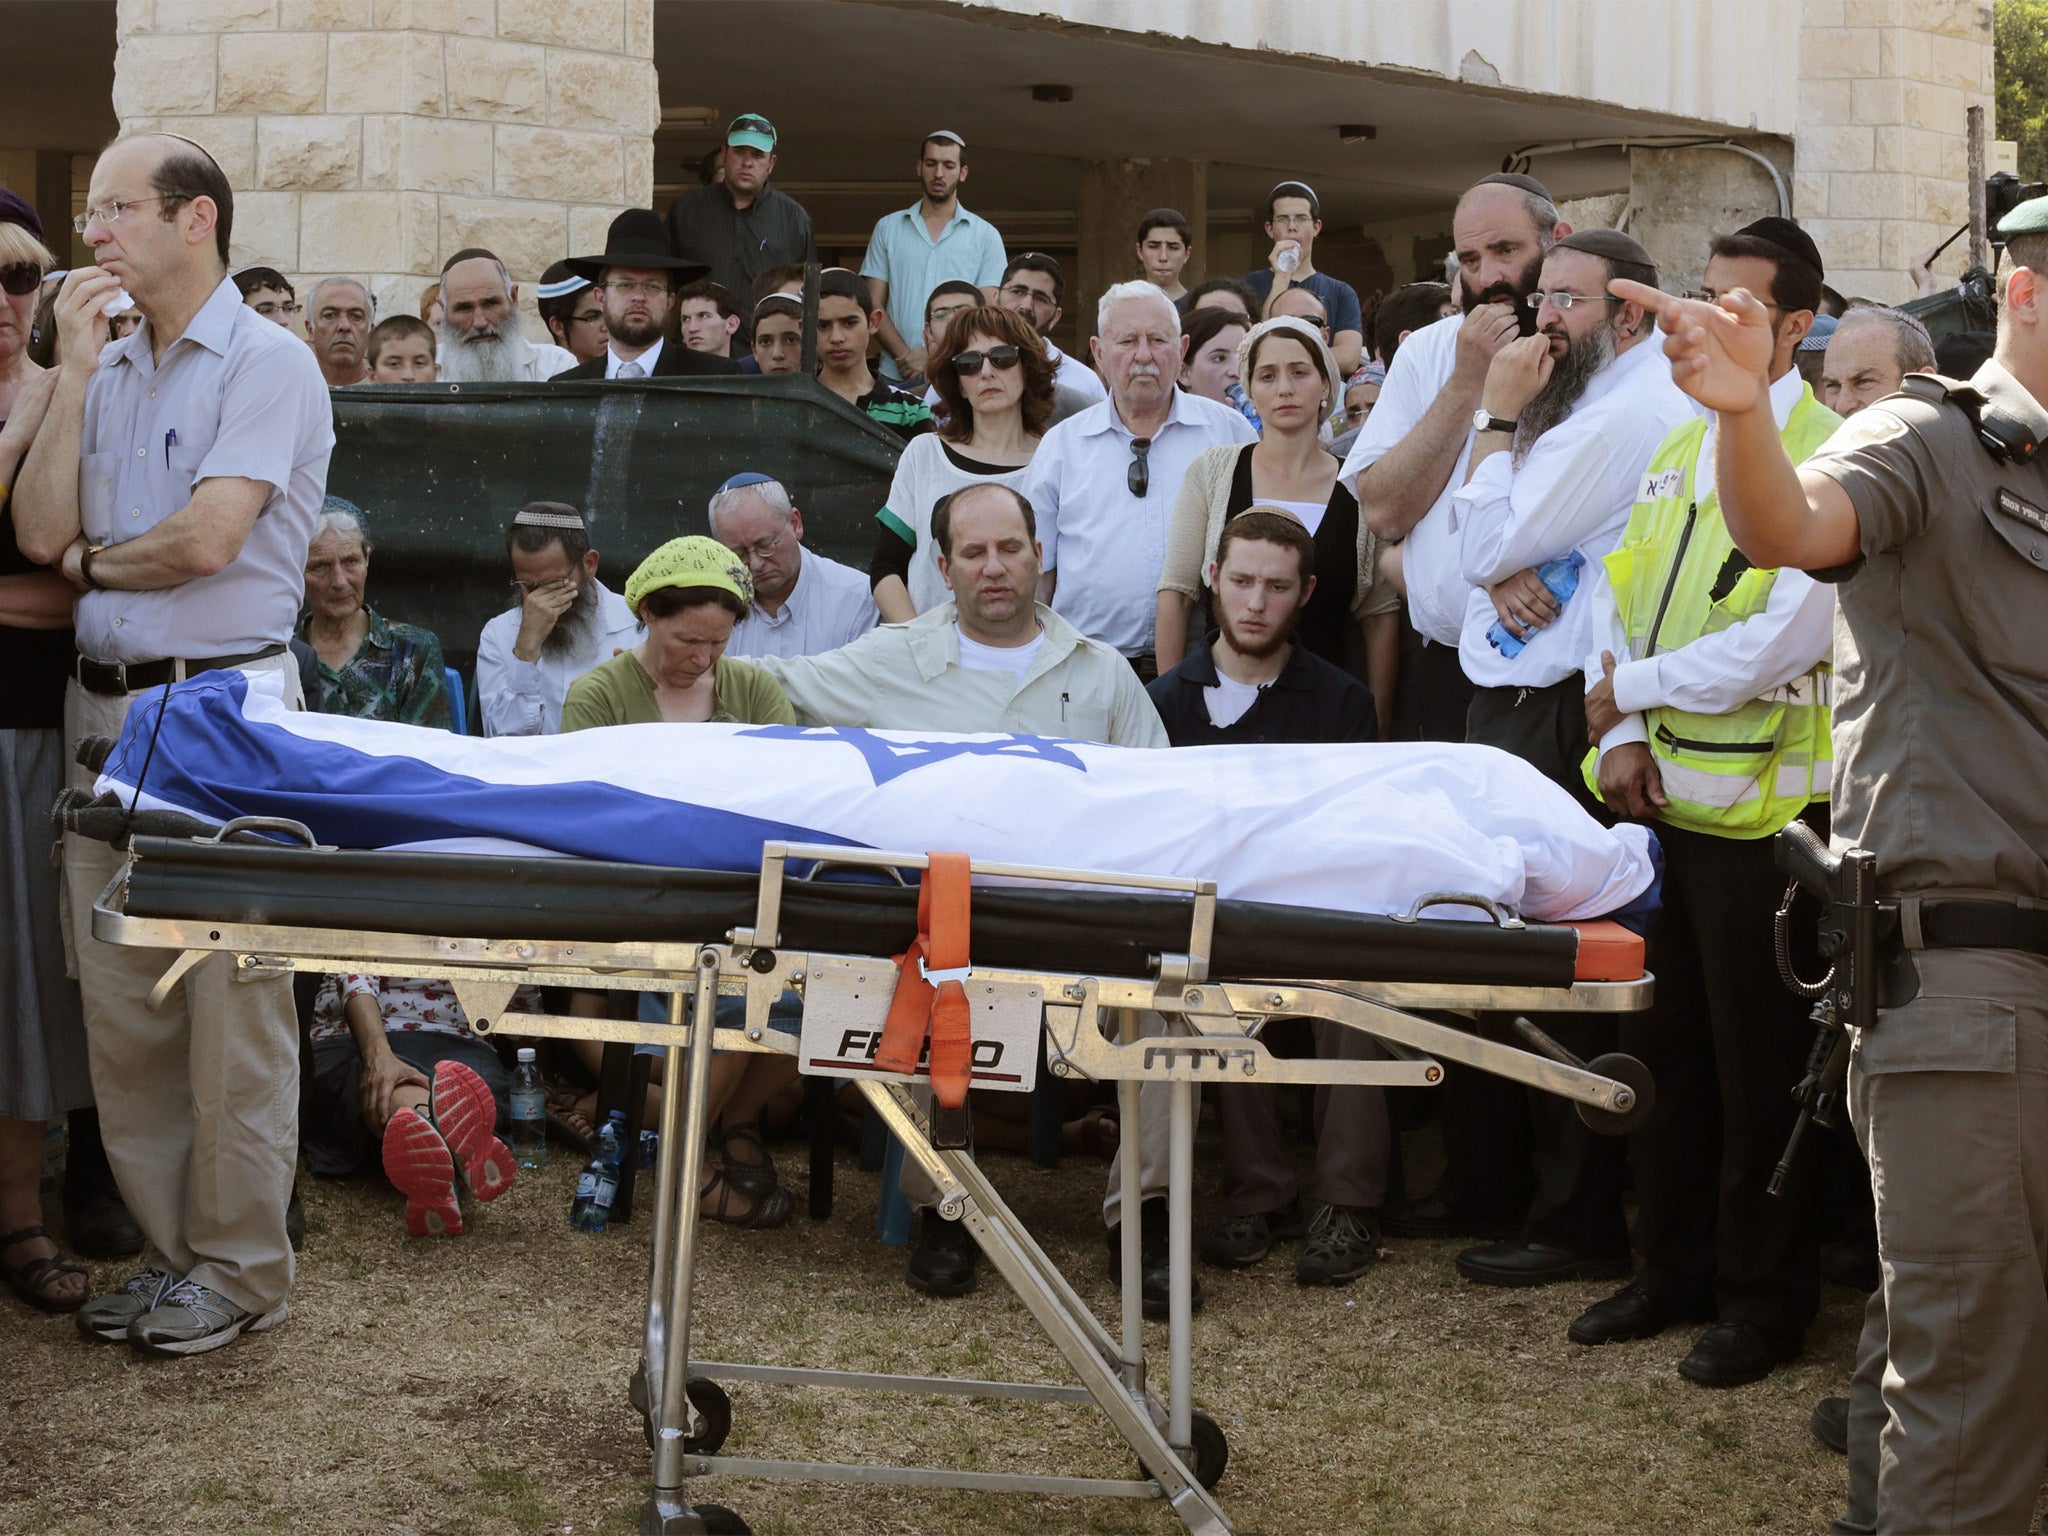 The parents and other family members of Naftali Frankel, one of the three Israeli teens found dead, attend his funeral service in Nof Ayalon, Israel